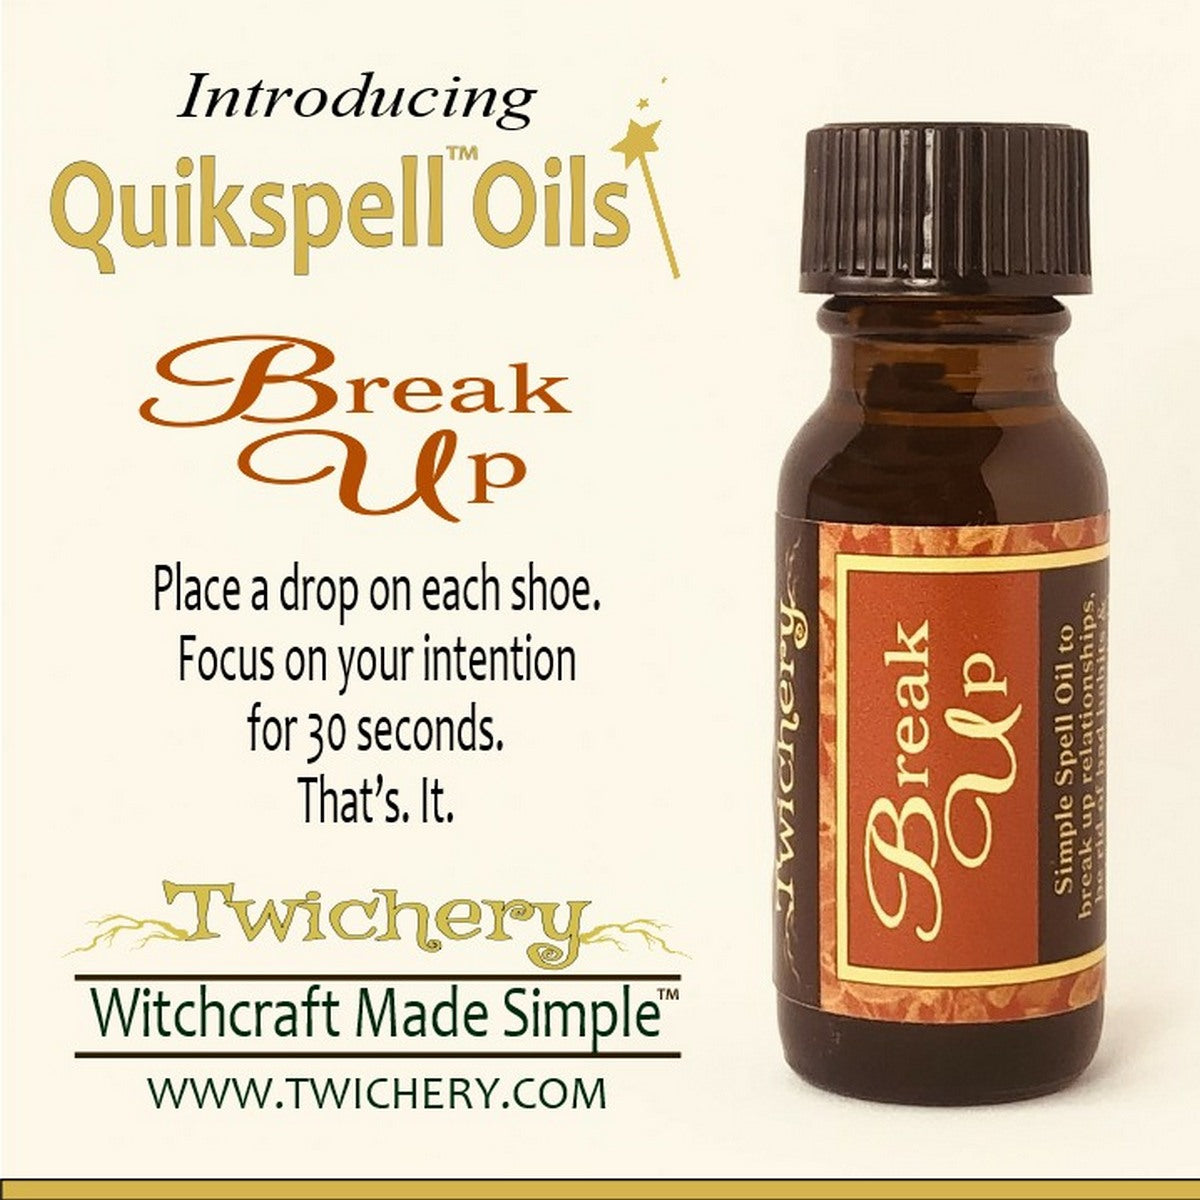 Twichery Break Up Quikspell Oil is for overcoming bad habits and bad relationships, hoodoo, voodoo, wicca, pagan, Witchcraft Made Simple!